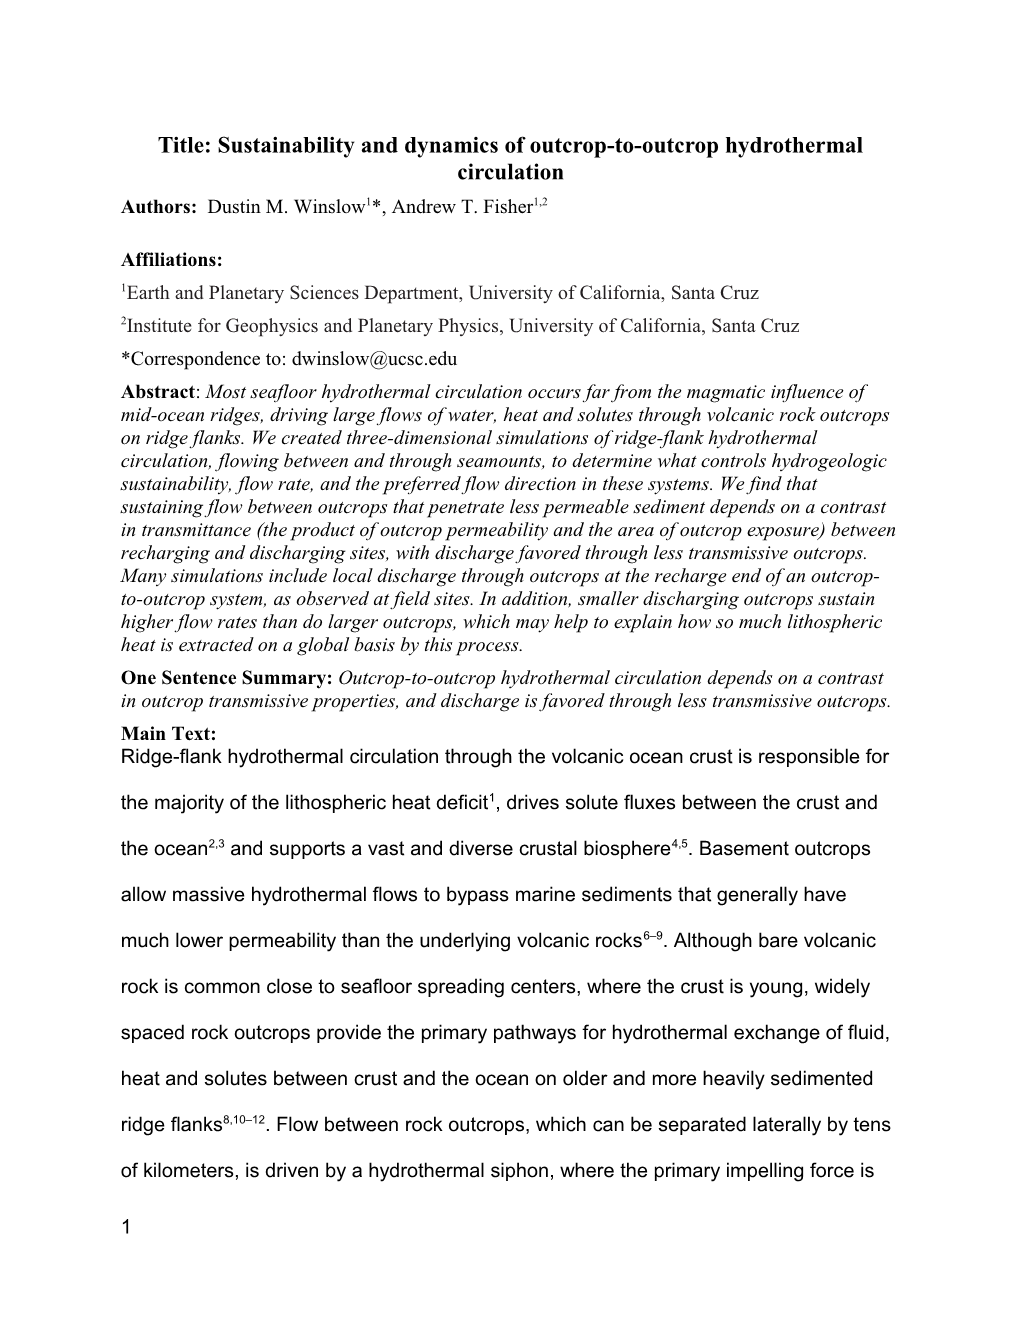 Title: Sustainability and Dynamics of Outcrop-To-Outcrop Hydrothermal Circulation